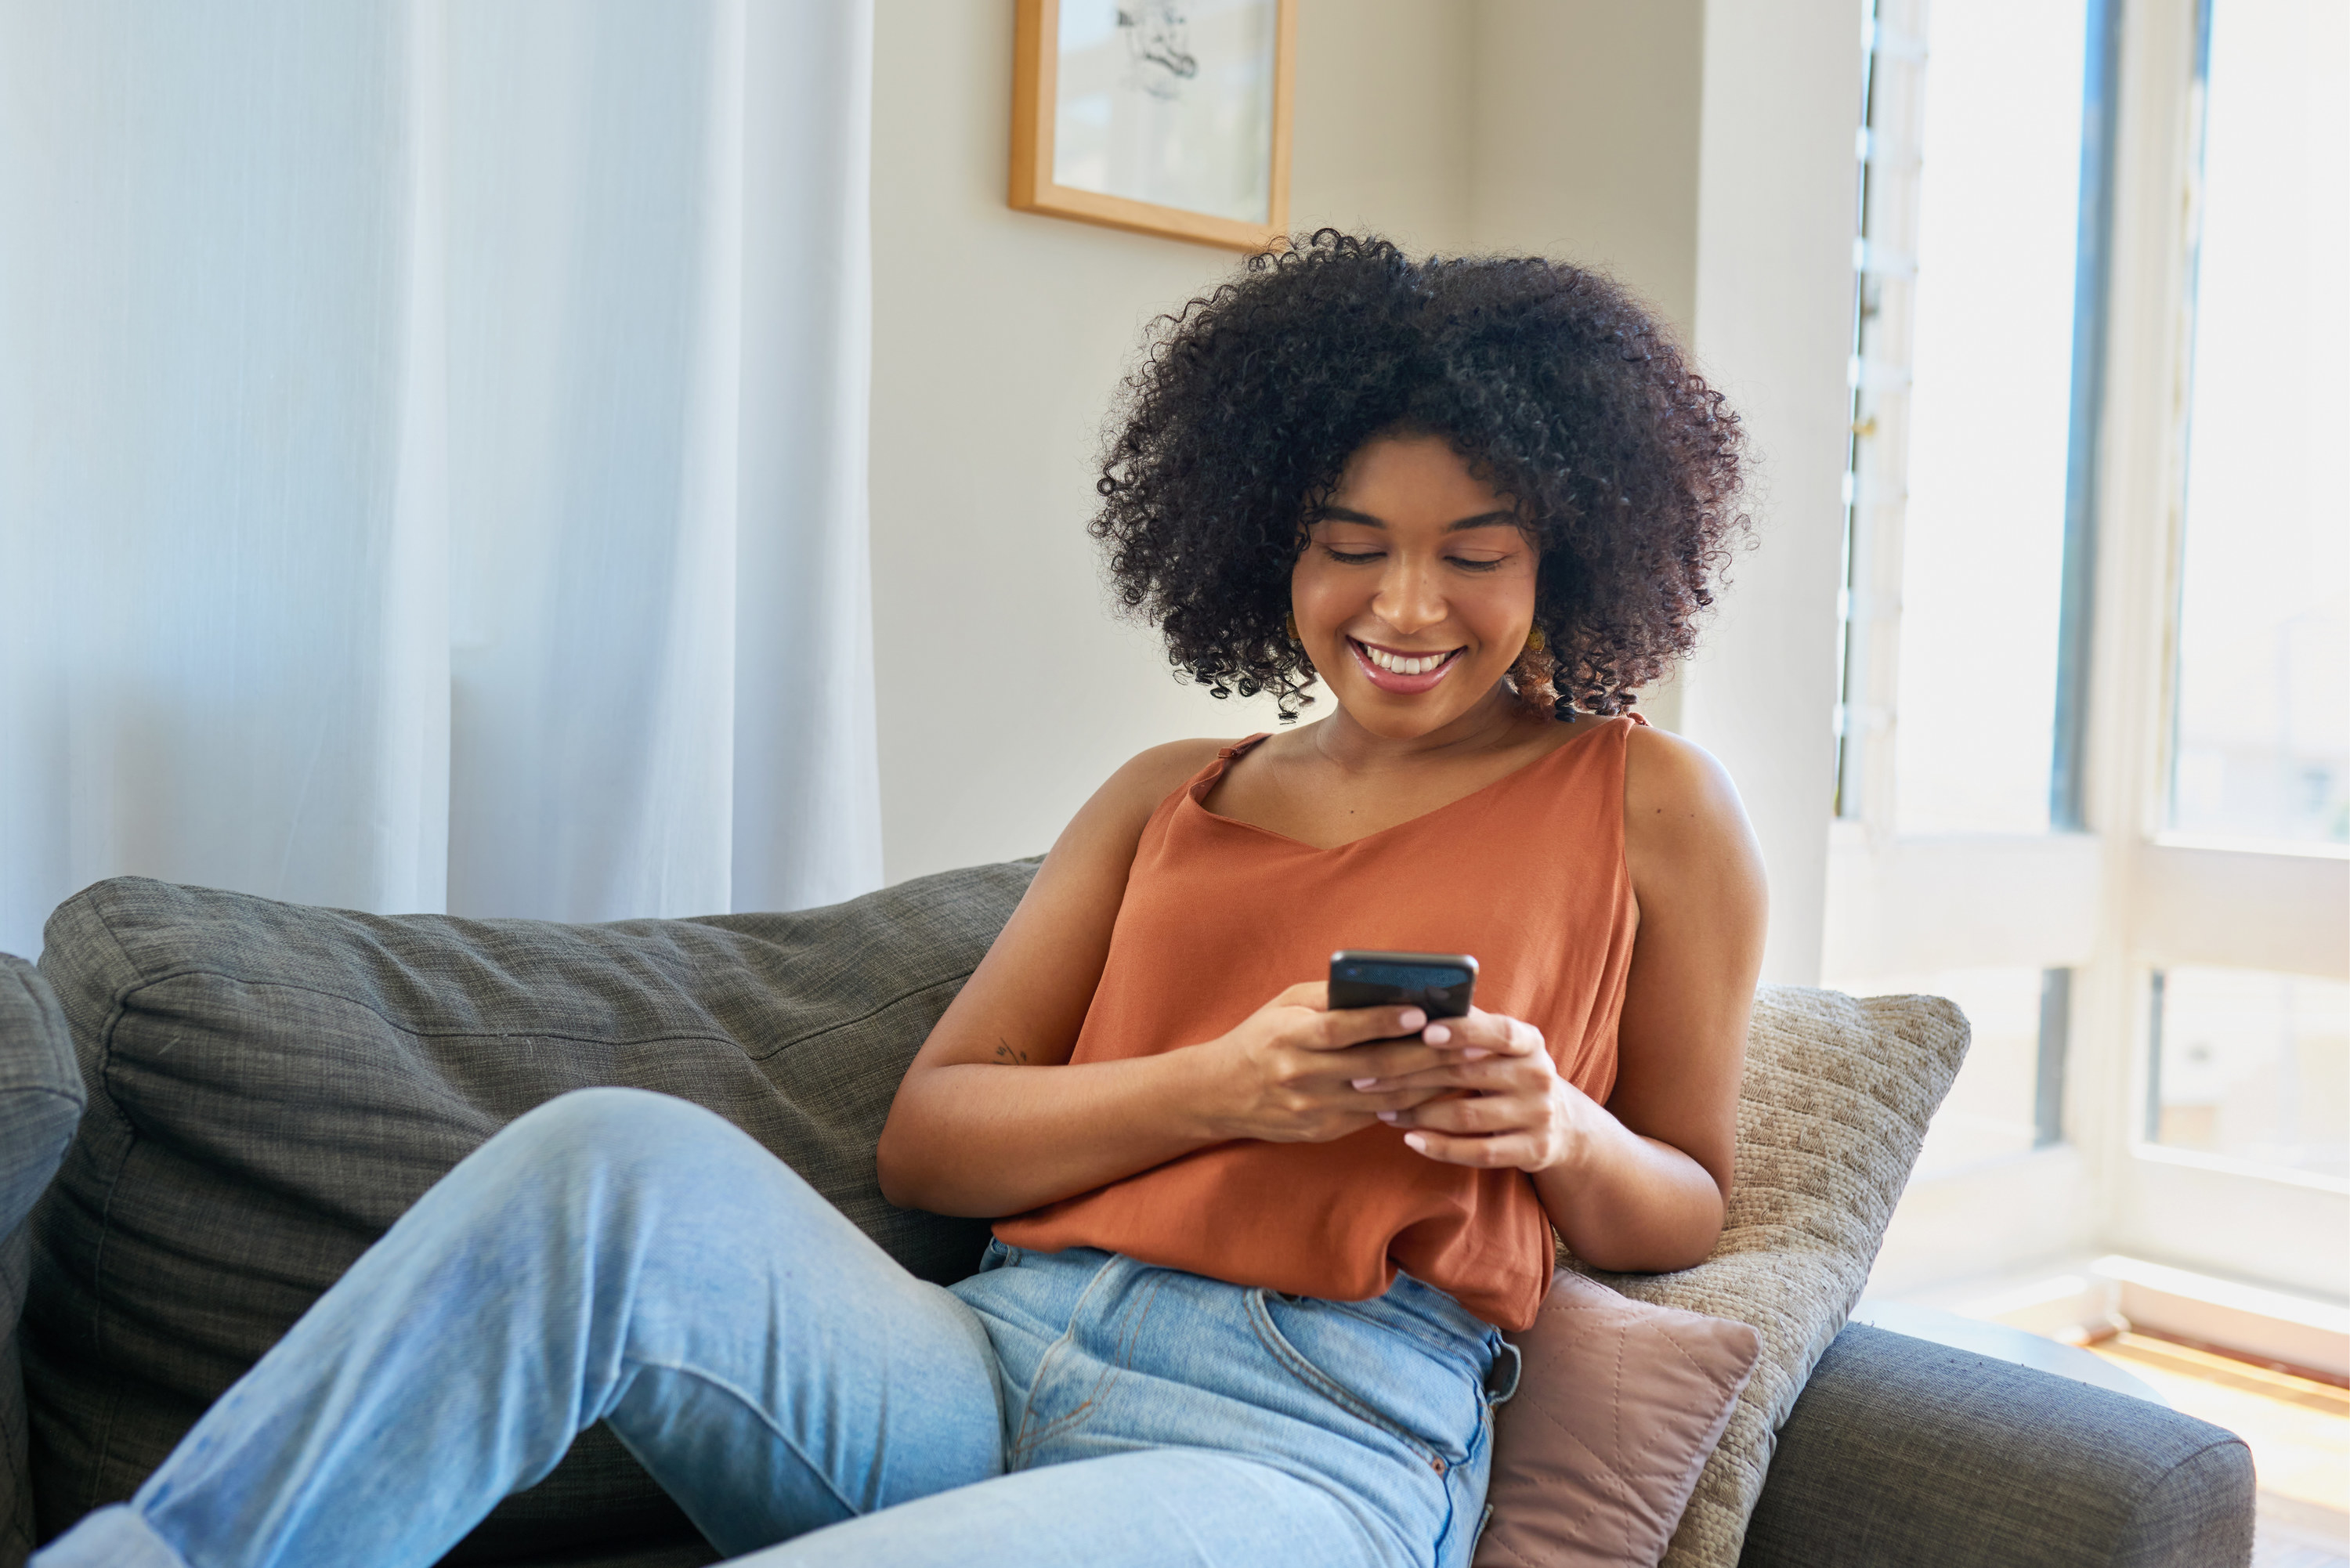 Young woman relaxing and looking at her phone